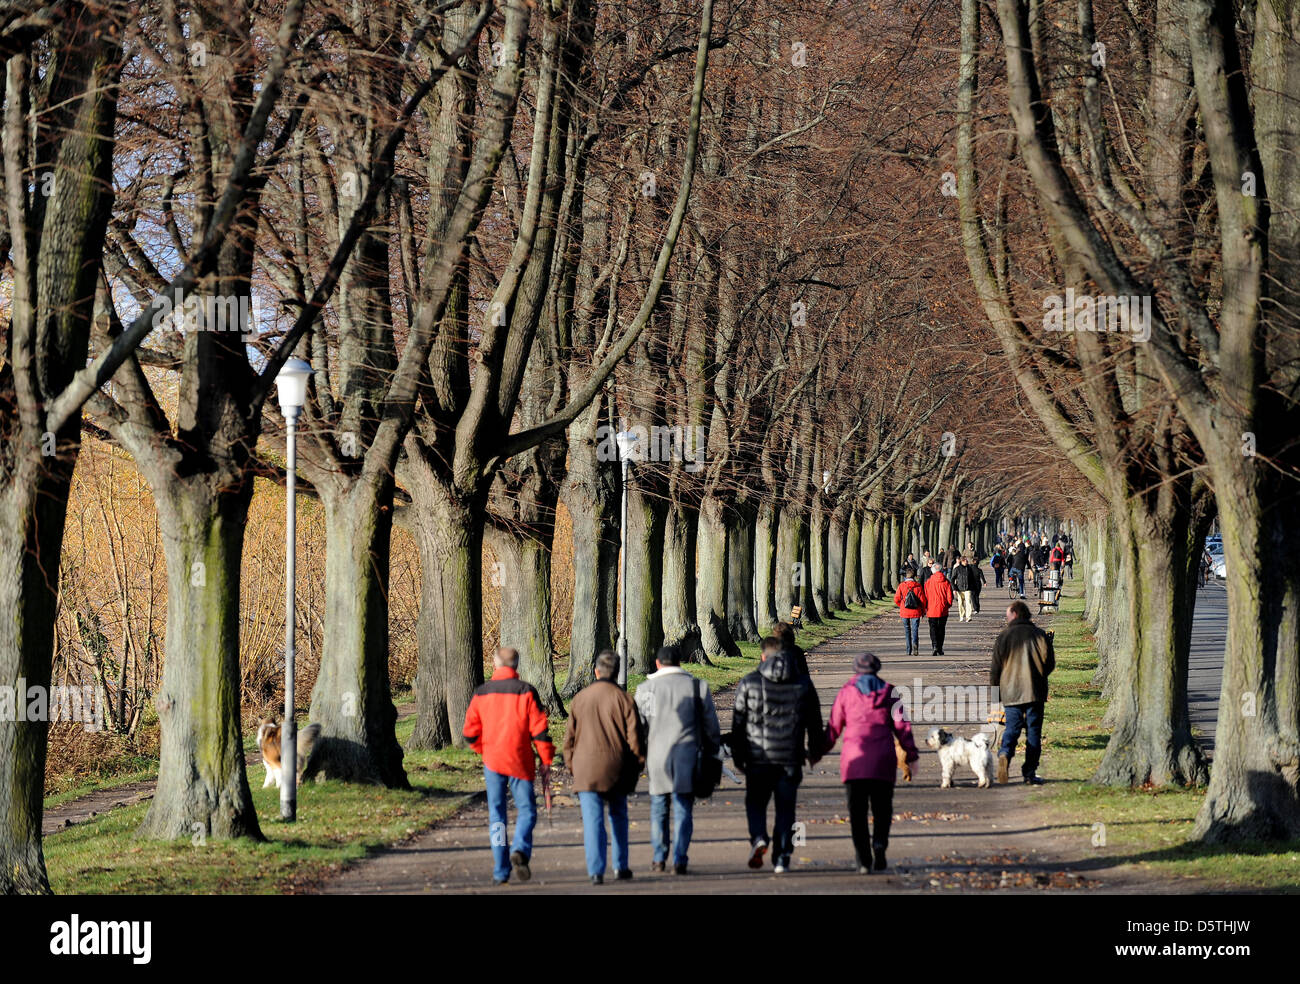 Numerous people enjoy the sun during a walk through a tree-lined alley at Lake Masch (Maschsee) in Hanover, Germany, 25 November 2012. Photo: Peter Steffen Stock Photo